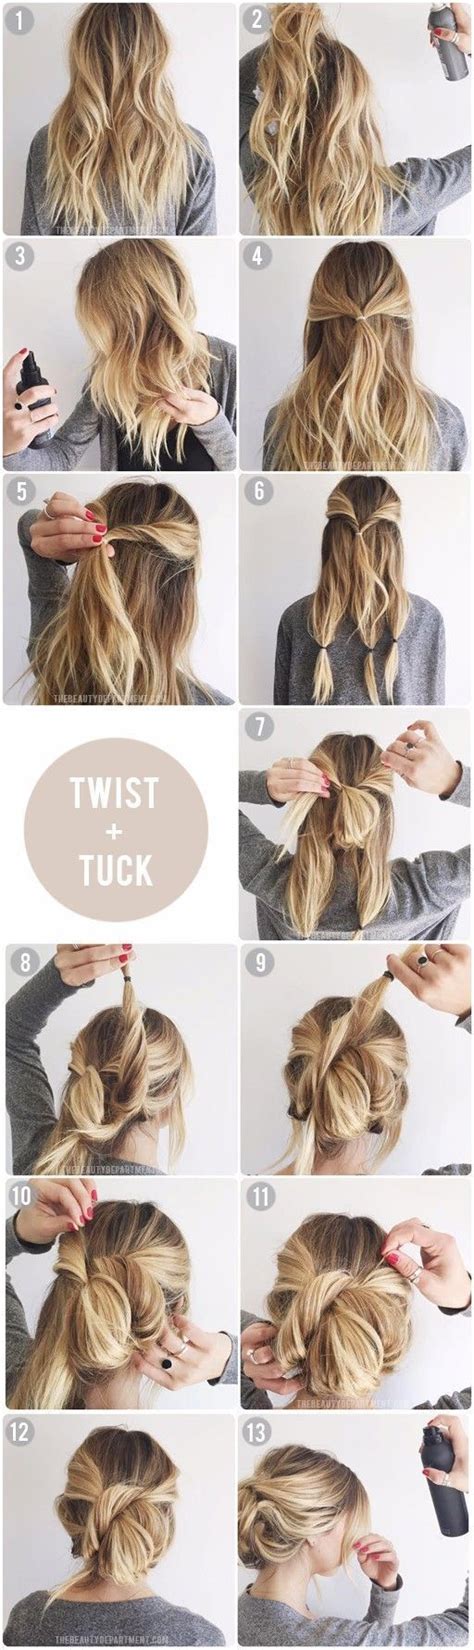 Unique How To Put Your Hair Up With A Hat Hairstyles Inspiration